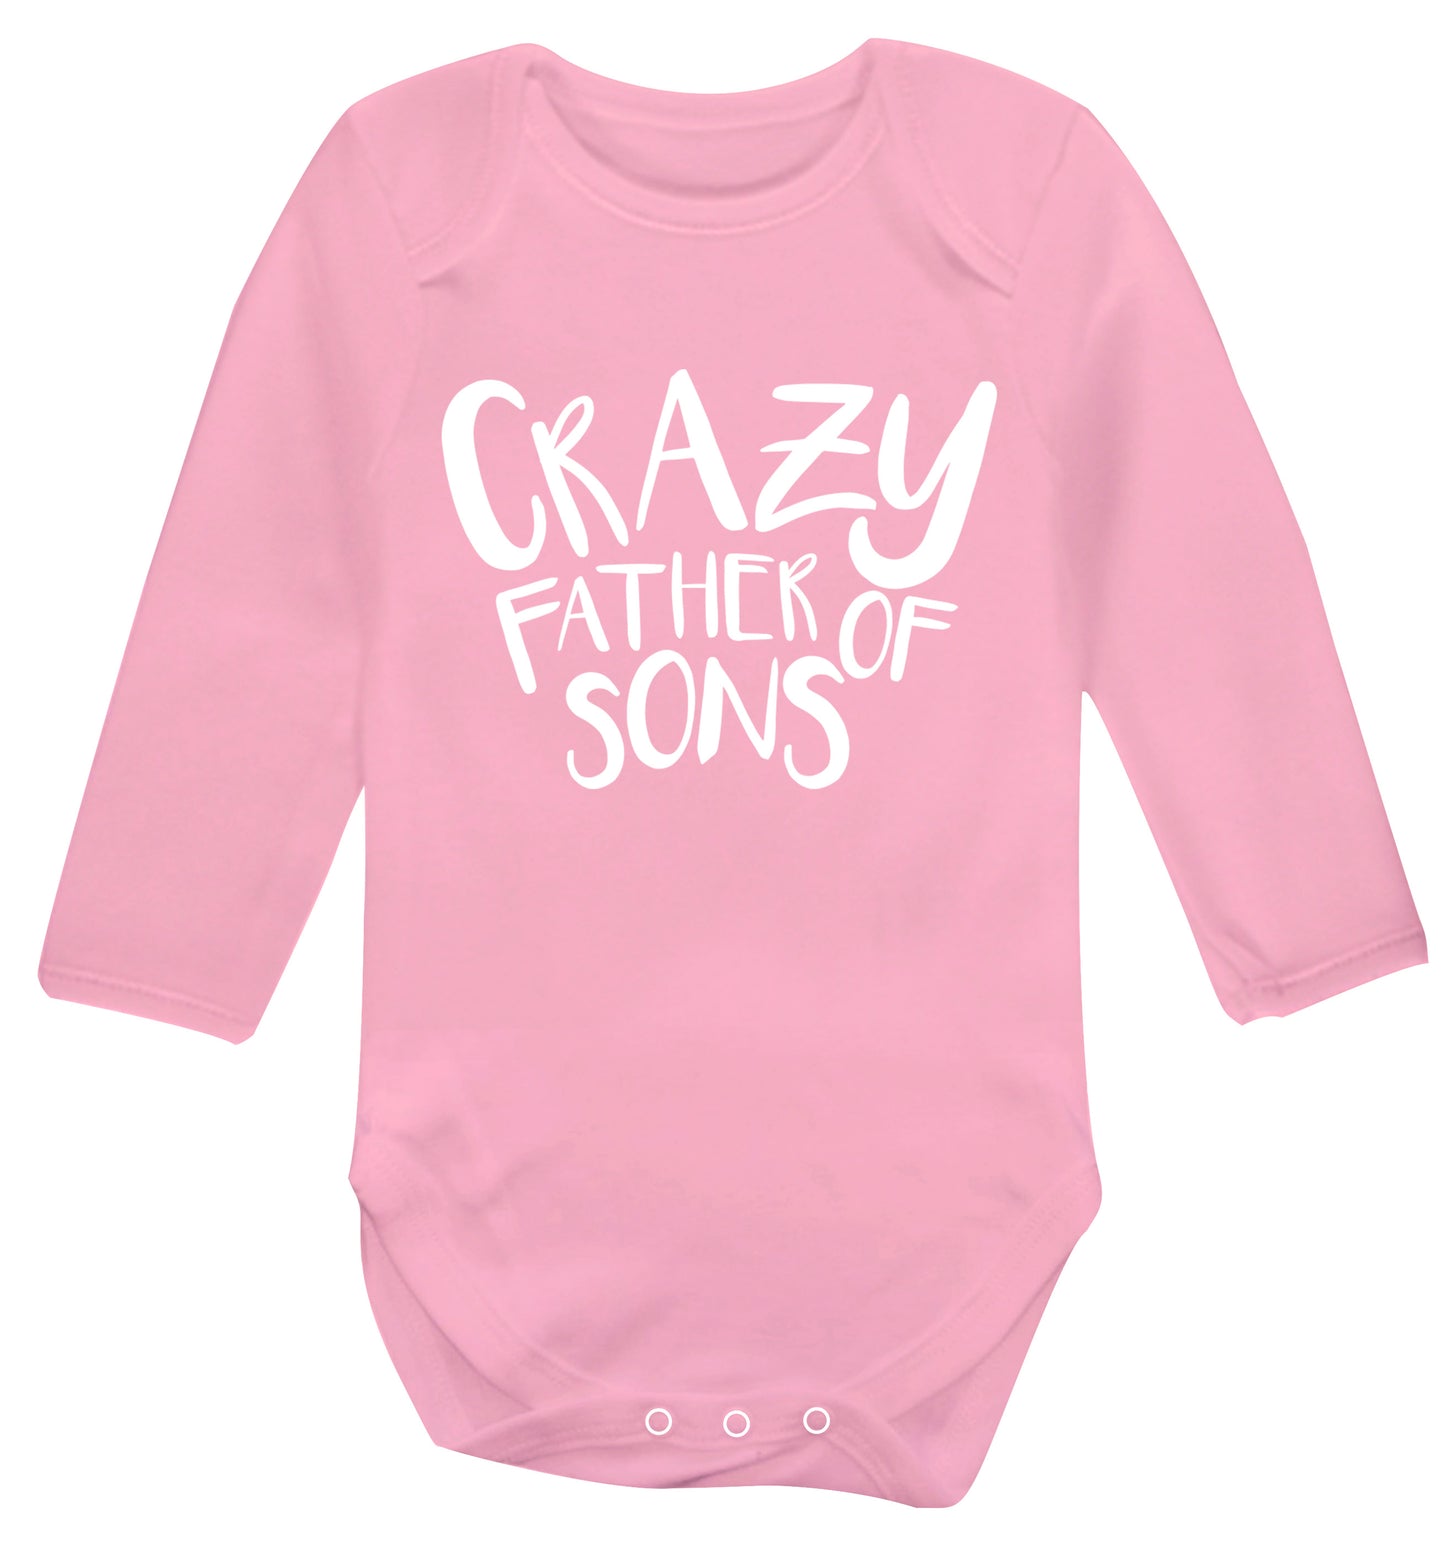 Crazy father of sons Baby Vest long sleeved pale pink 6-12 months